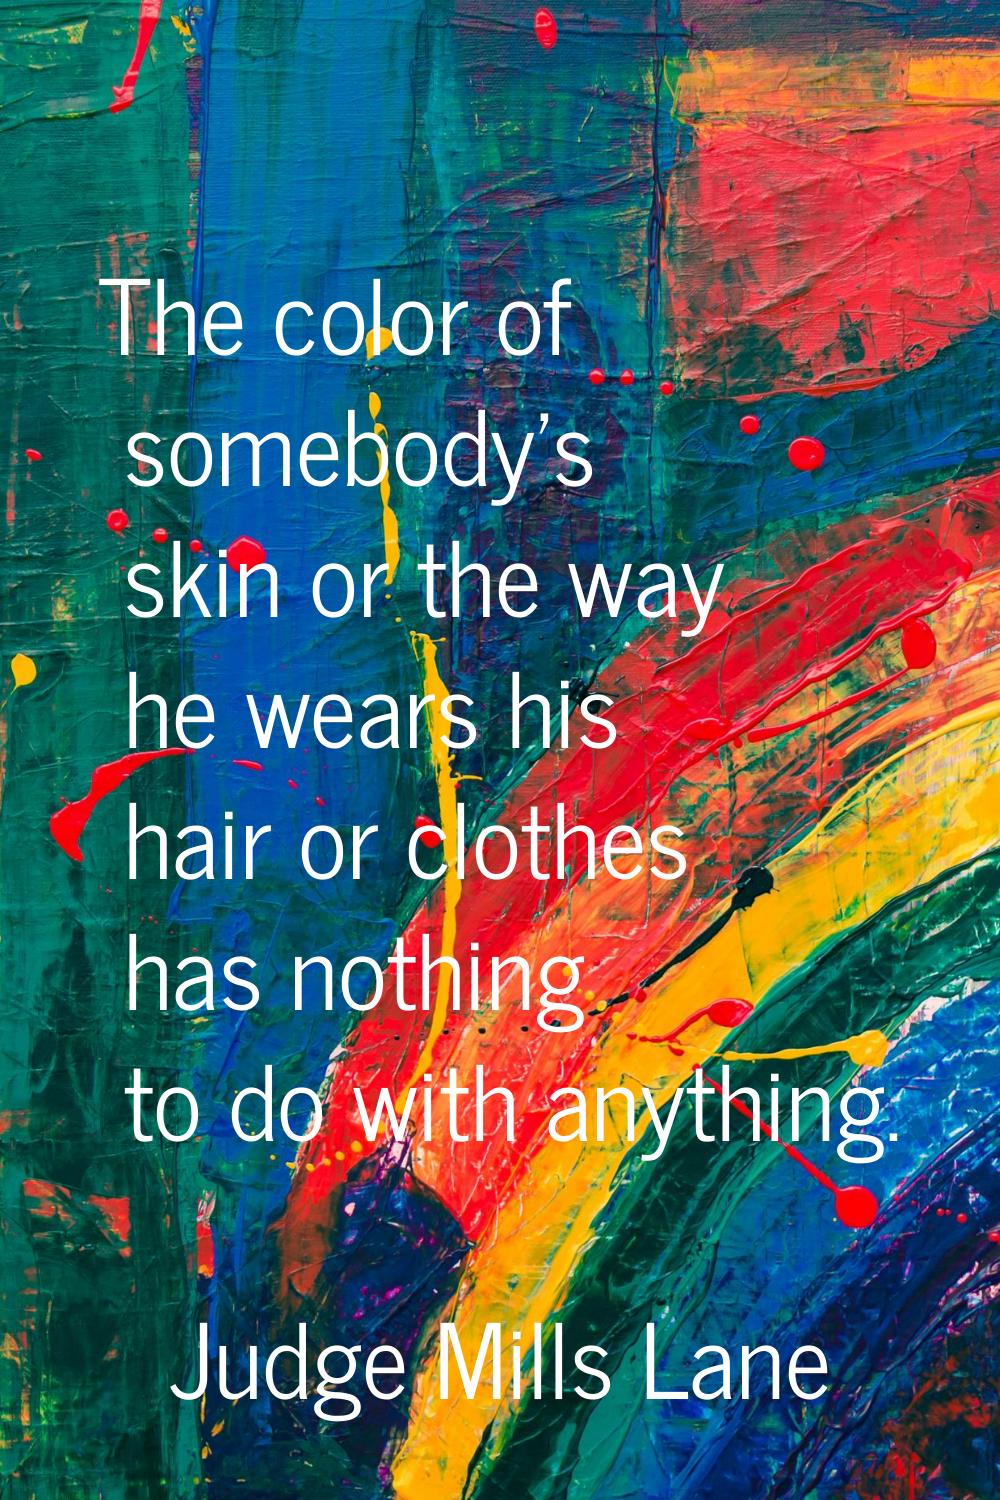 The color of somebody's skin or the way he wears his hair or clothes has nothing to do with anythin